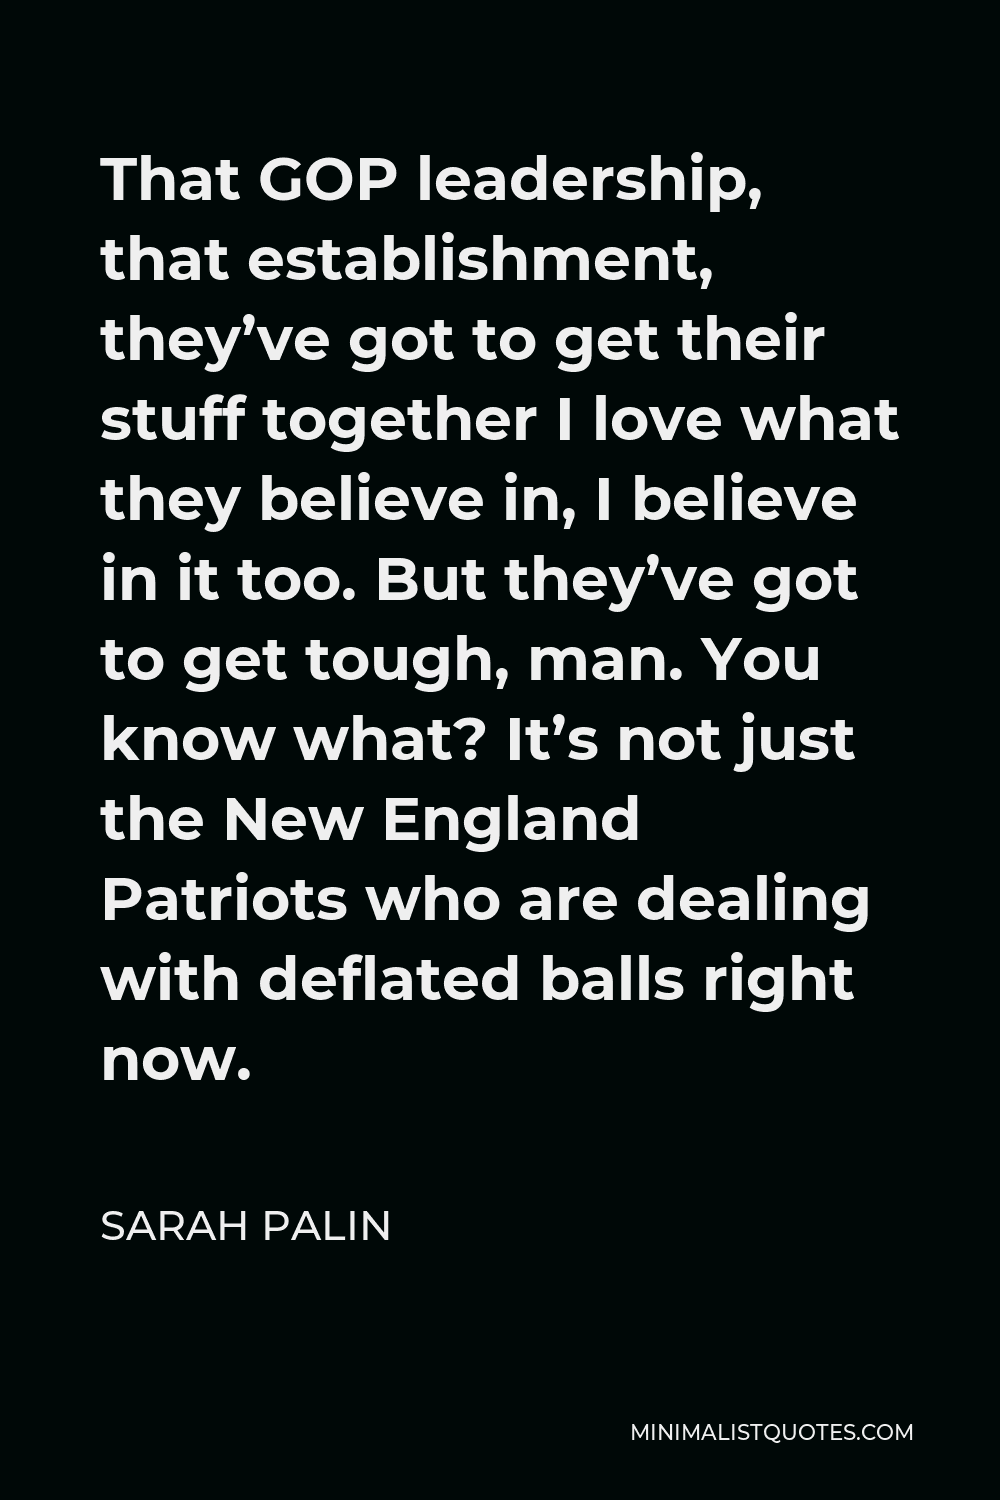 Sarah Palin Quote - That GOP leadership, that establishment, they’ve got to get their stuff together I love what they believe in, I believe in it too. But they’ve got to get tough, man. You know what? It’s not just the New England Patriots who are dealing with deflated balls right now.